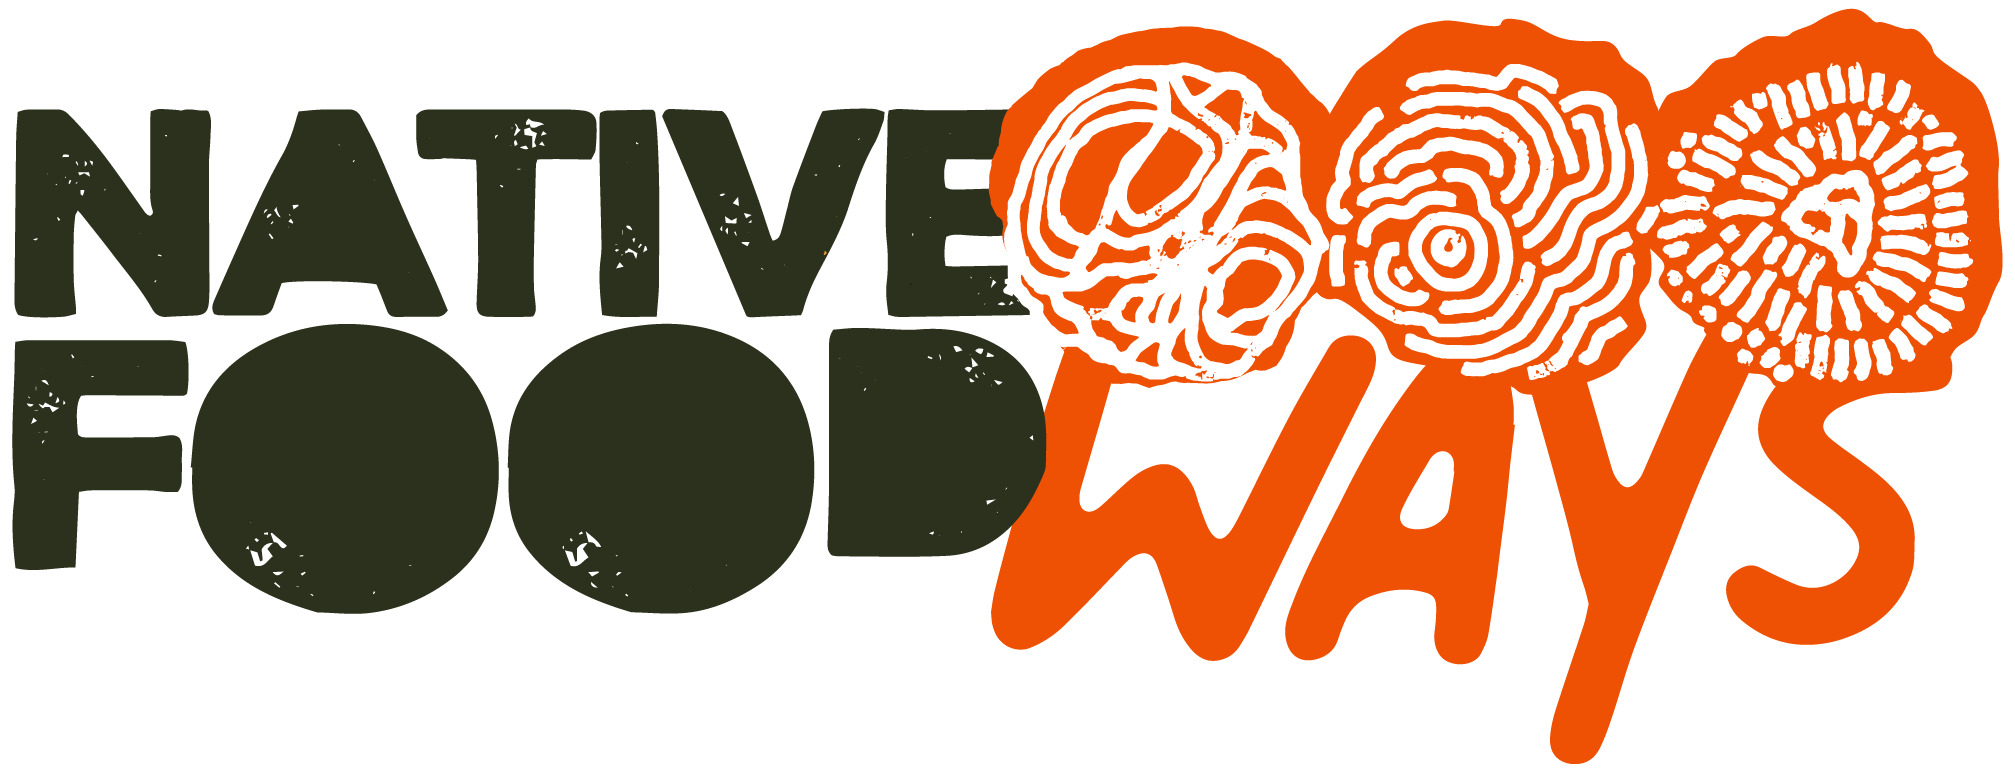 NFW_LOGO_FULL COLOUR.png